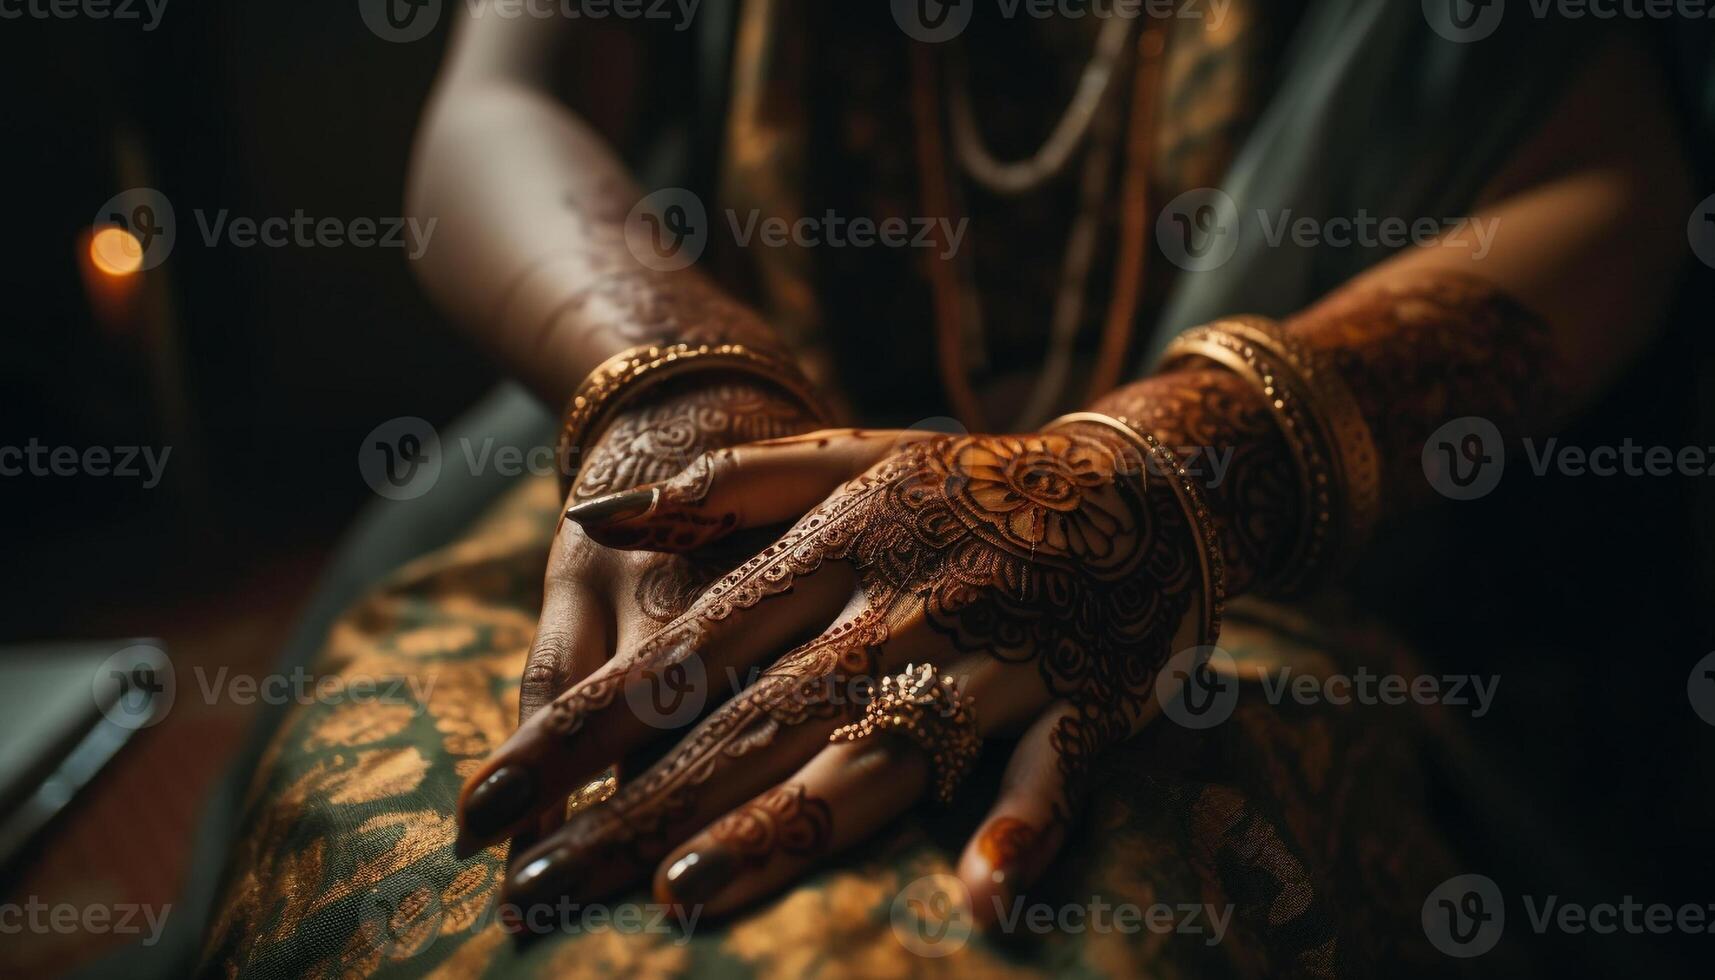 Indigenous elegance Indian bracelet, gold, henna tattoo adornment generated by AI photo